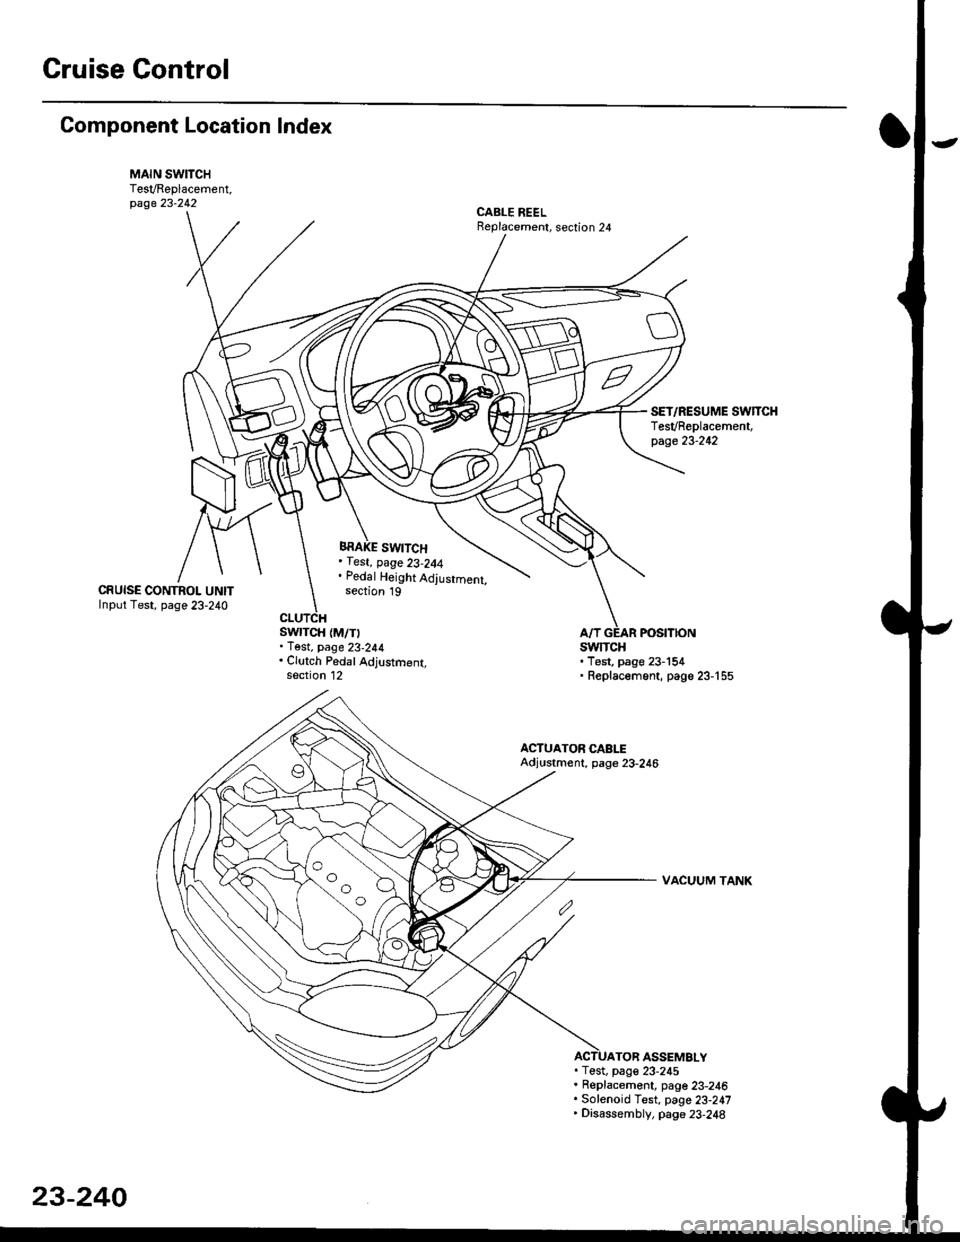 HONDA CIVIC 1996 6.G Workshop Manual Gruise Control
Component Location Index
MAIN SWITCHTesVReplacement,page 23-242CABLE REELReplacement, section 24
BRAKE SWITCH, fest, page 23-244. Pedal Height Adjustment,section 19CRUISE CONTROI. UNITI